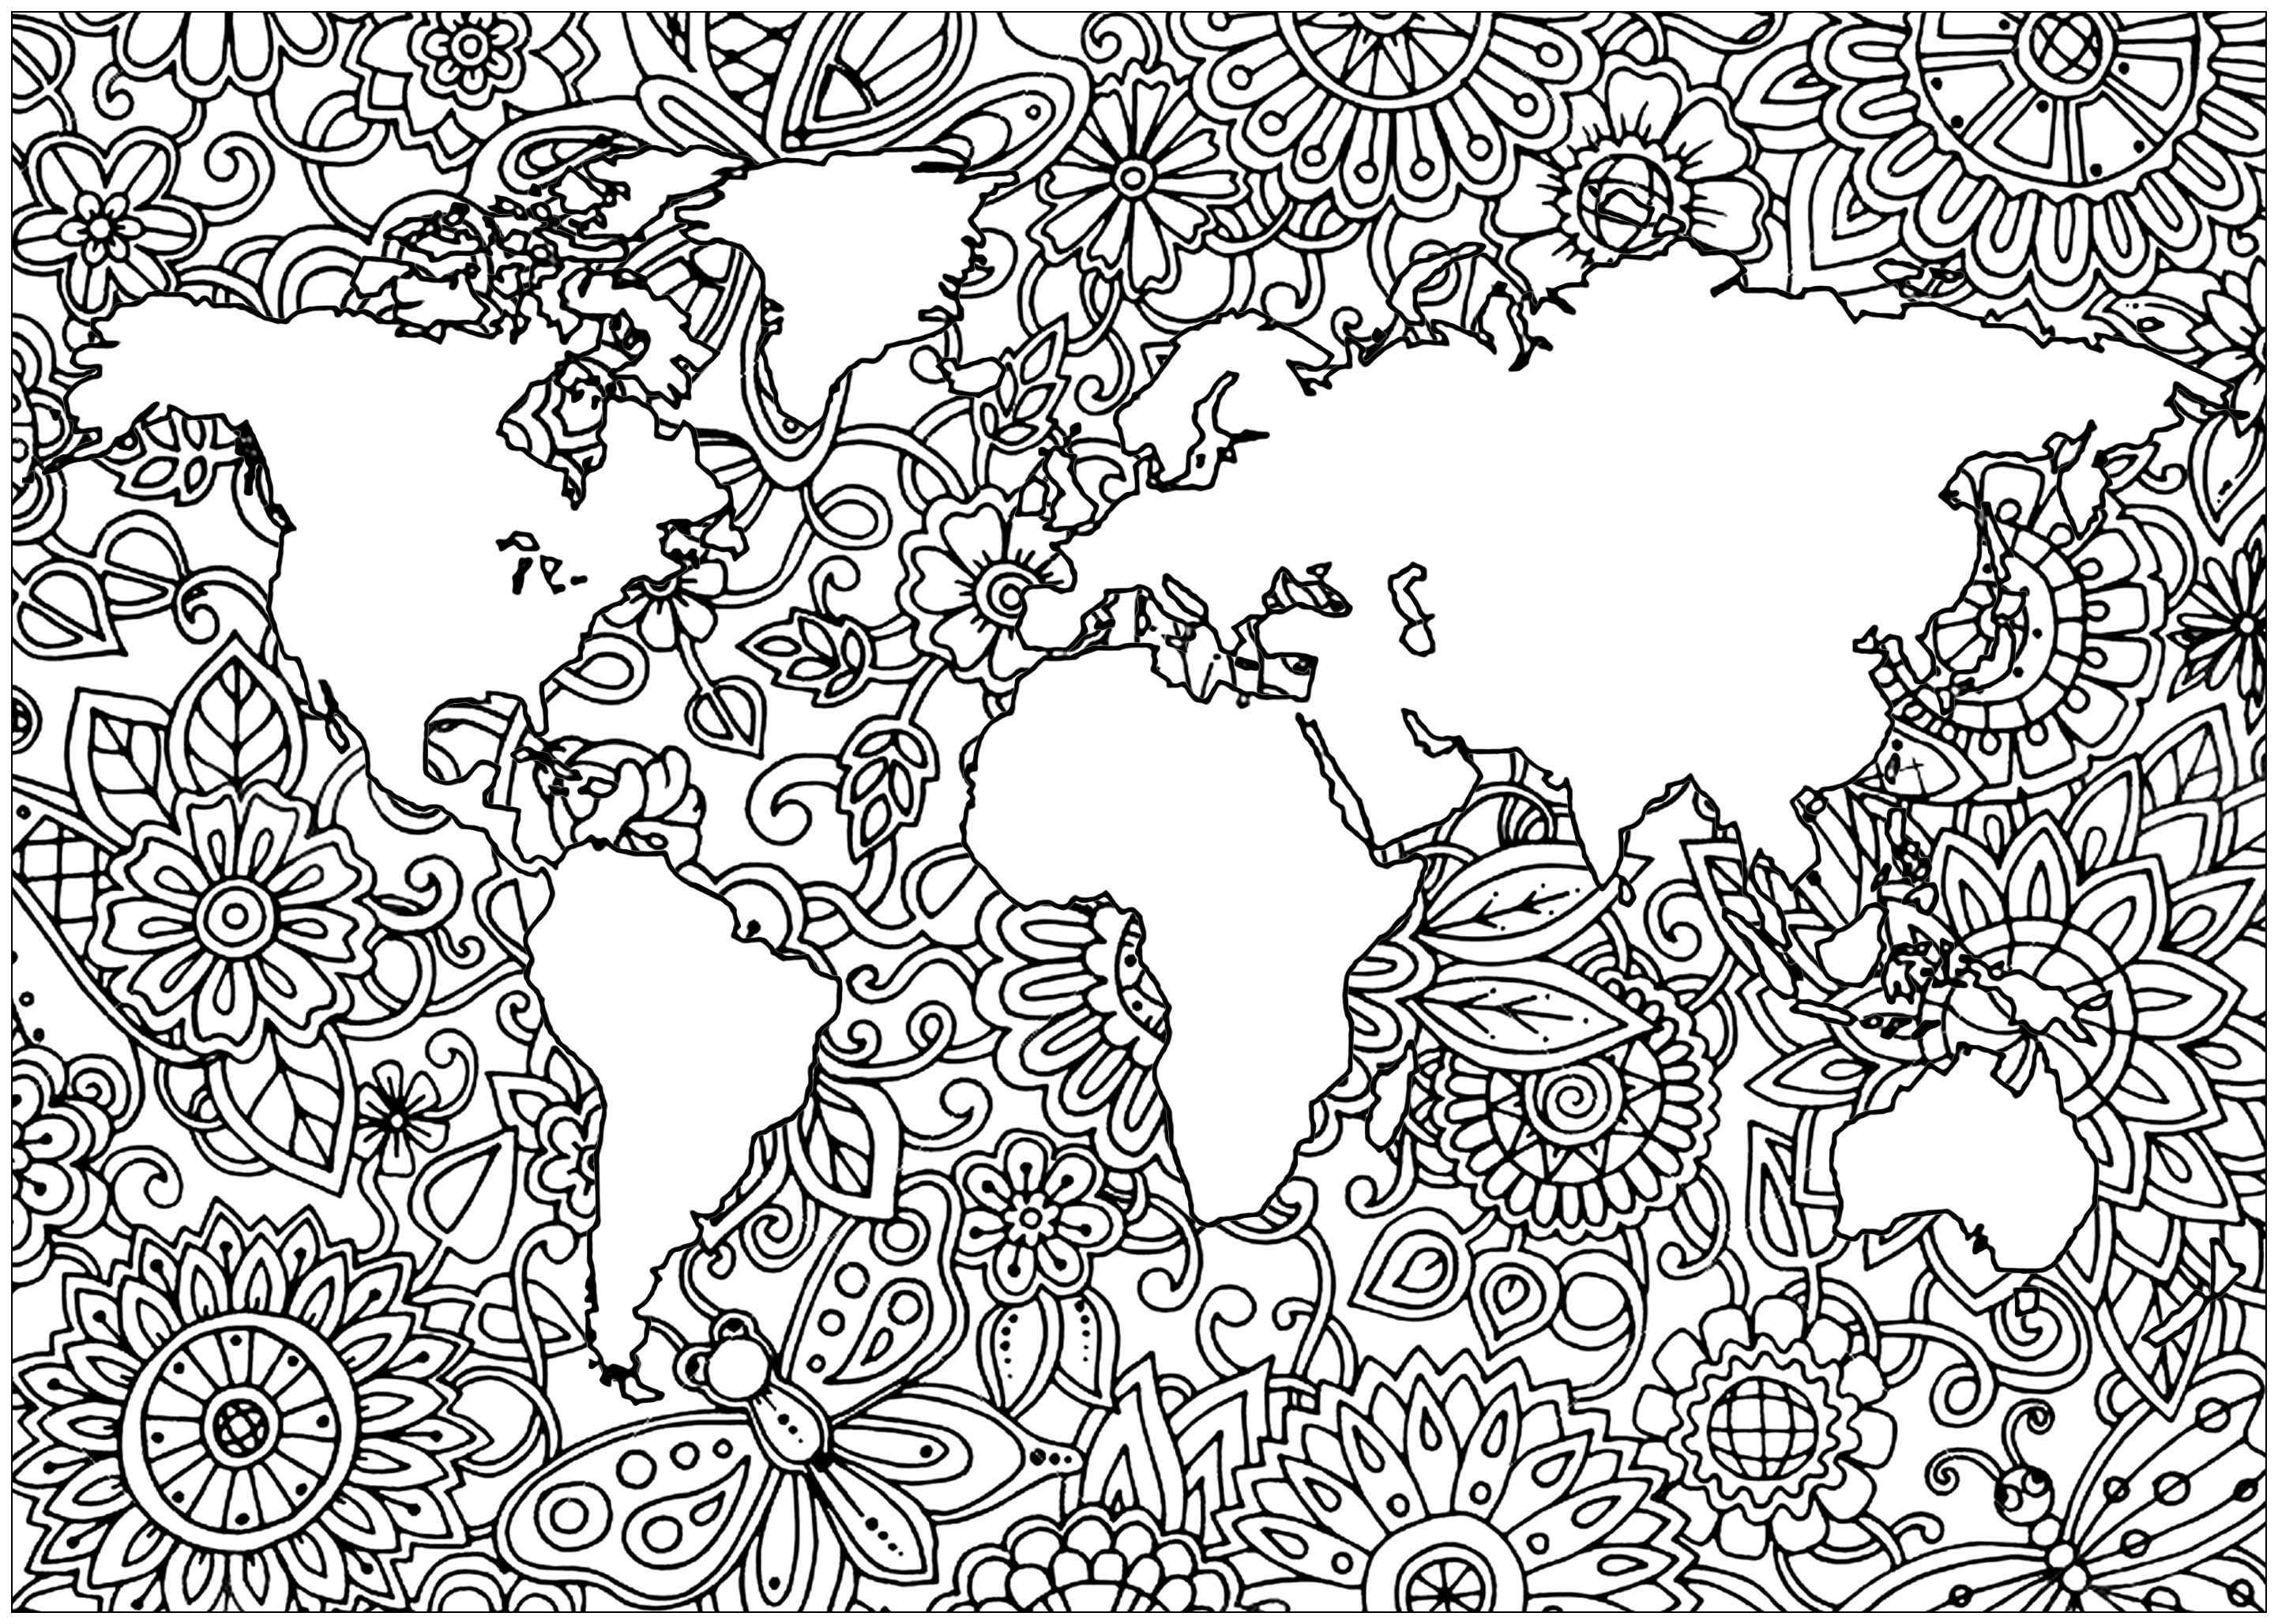 Planet Earth and its continents, with beautiful Flowers in the seas, Artist : Art. Isabelle